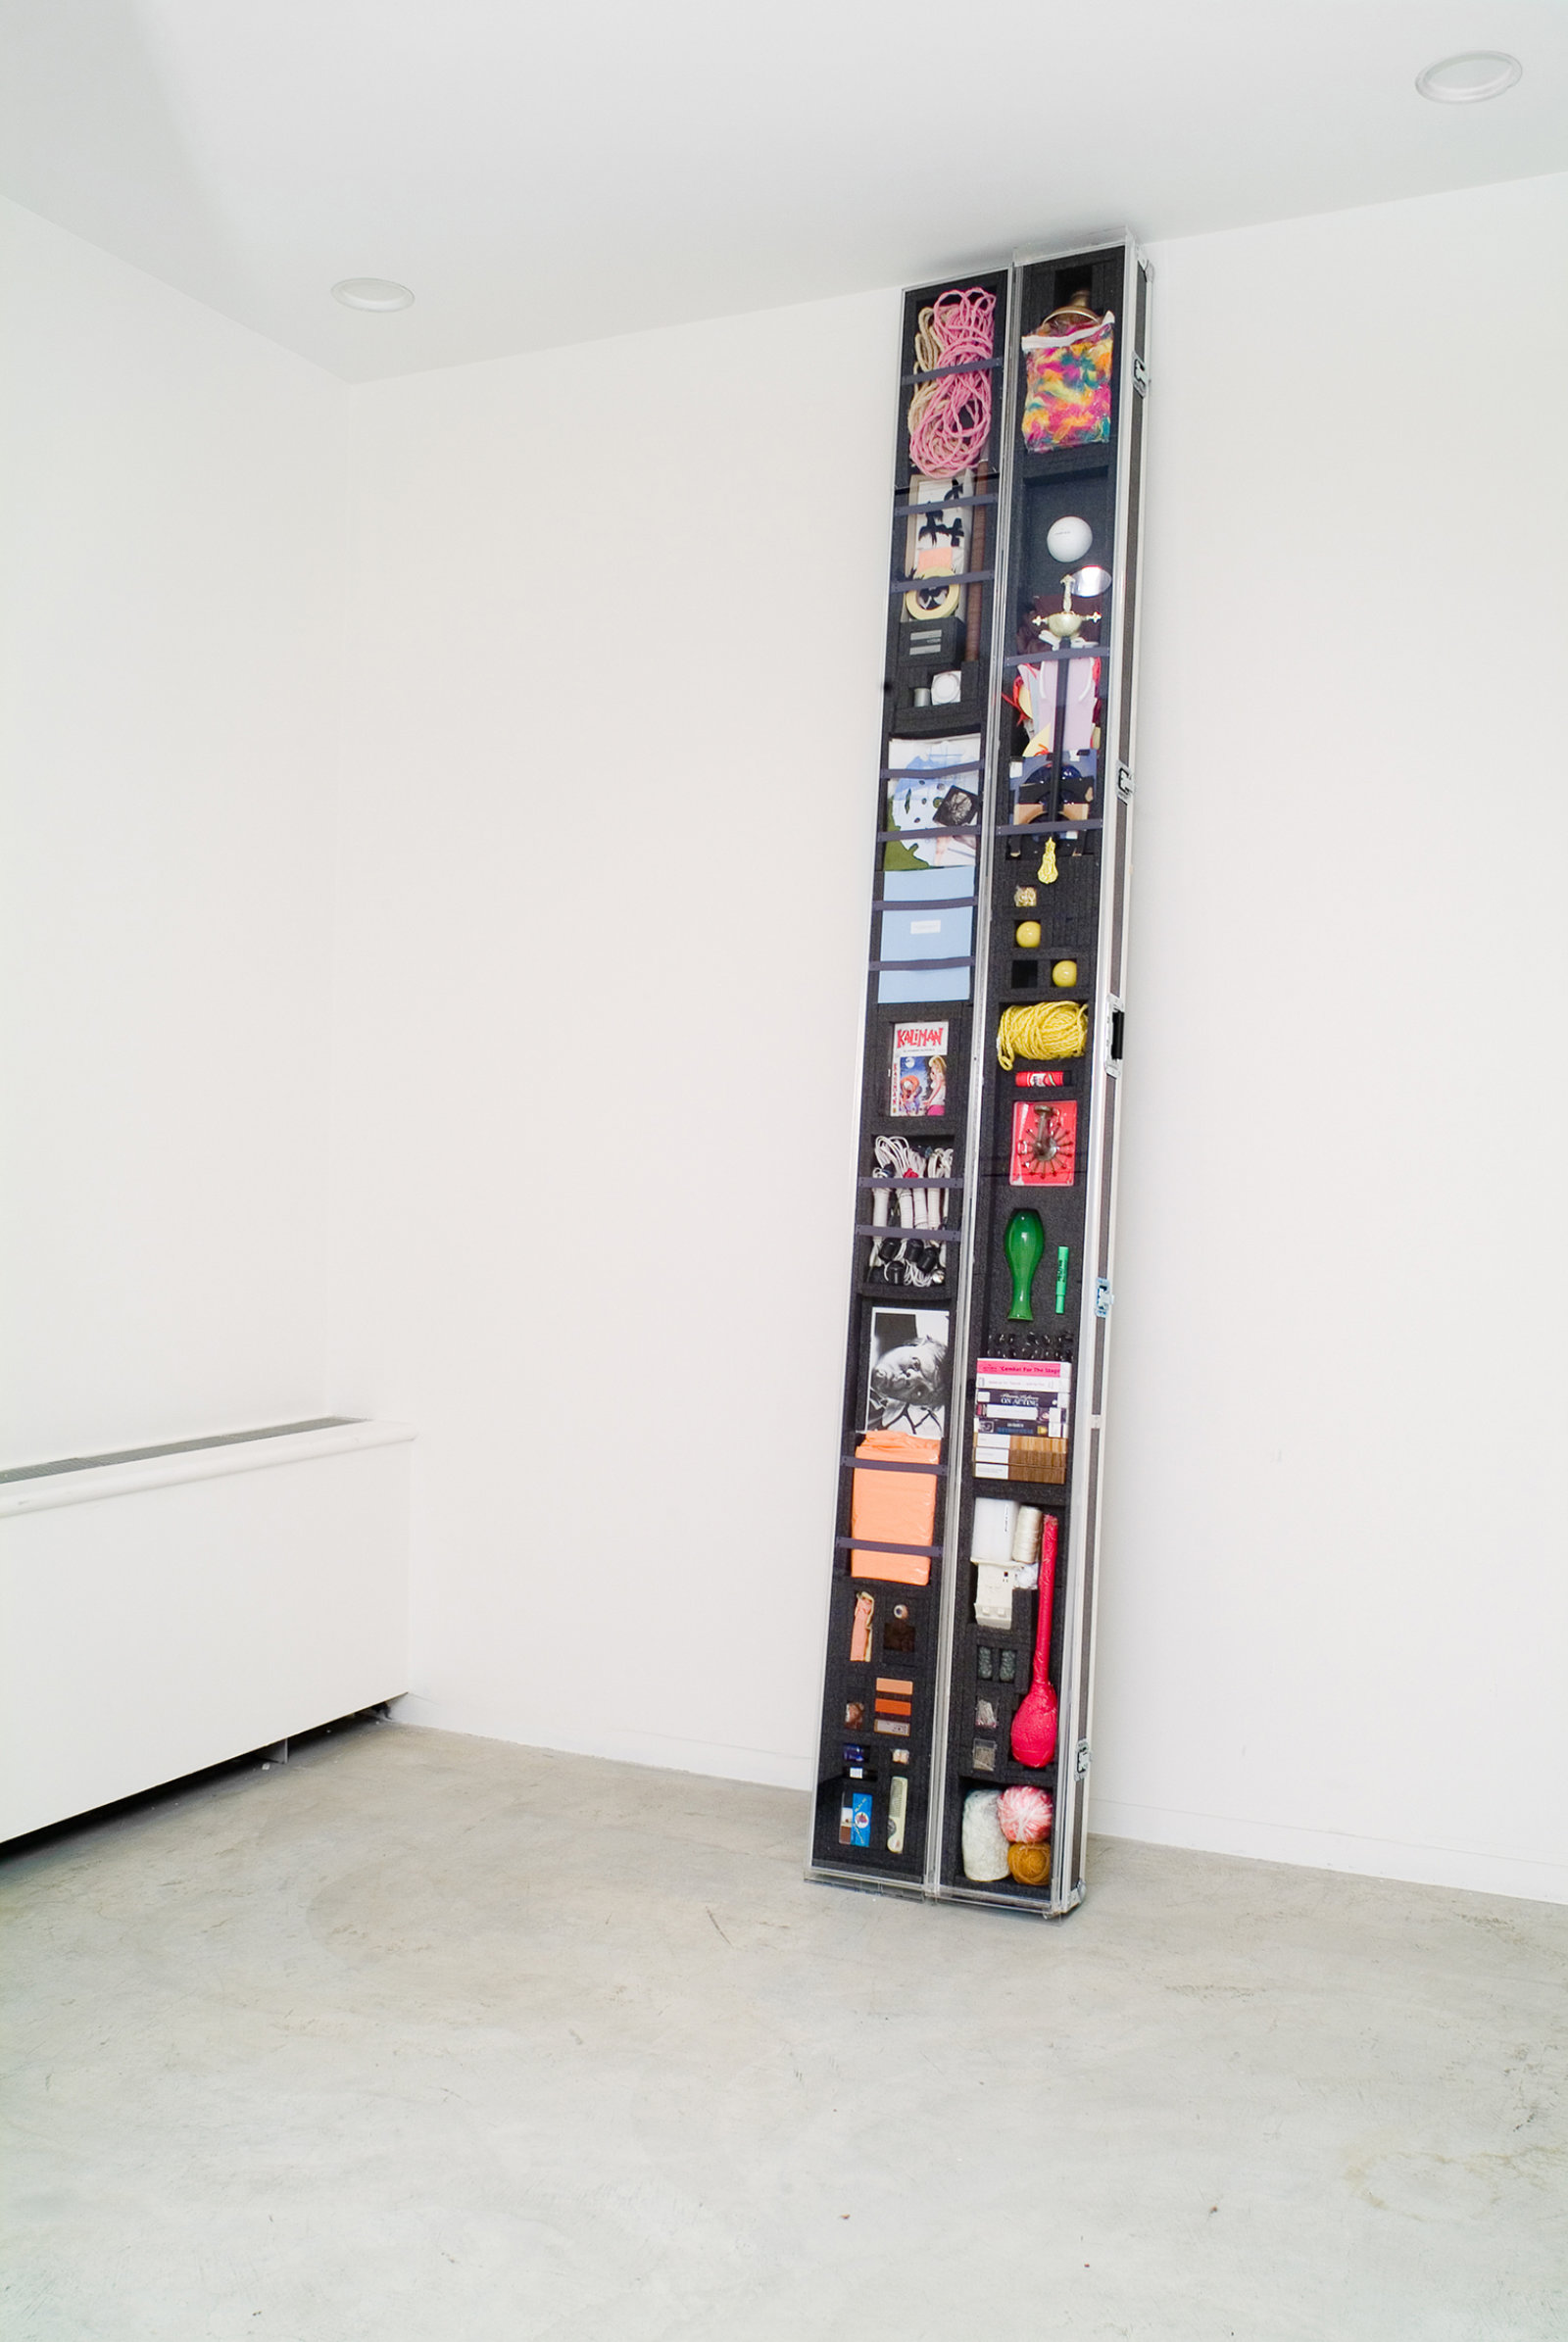 Geoffrey Farmer, Hunchback Kit, 2000, crate, lights, electrical cords, drawings, research documents, monitor, VCR, videos, dimensions variable. Installation view, Classified Materials, Vancouver Art Gallery, 2005